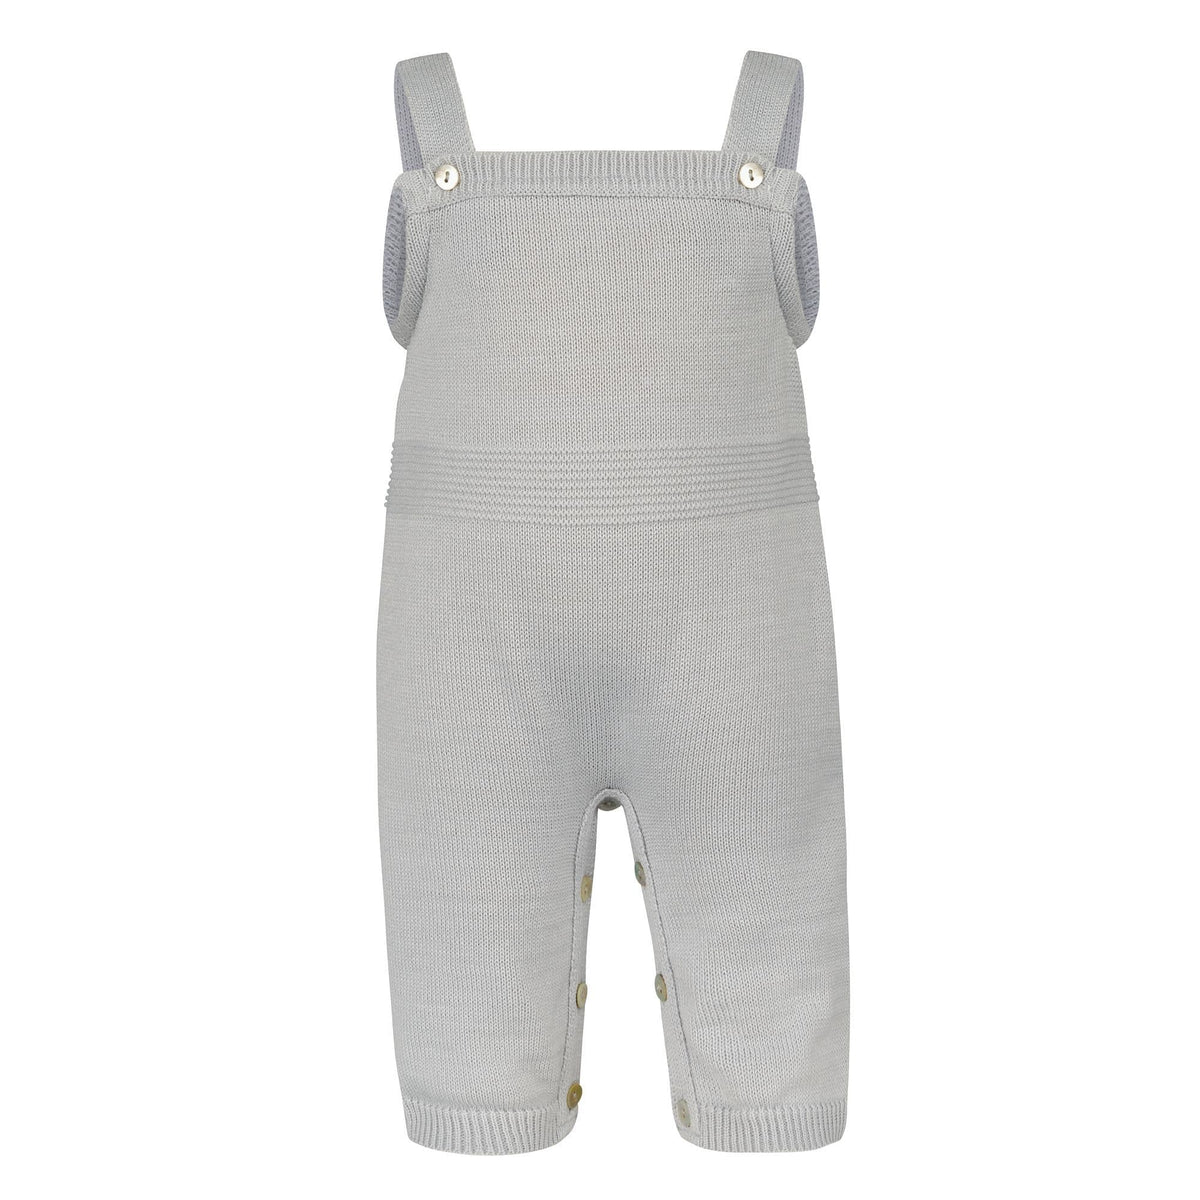 Baby knitted dungarees - unisex baby